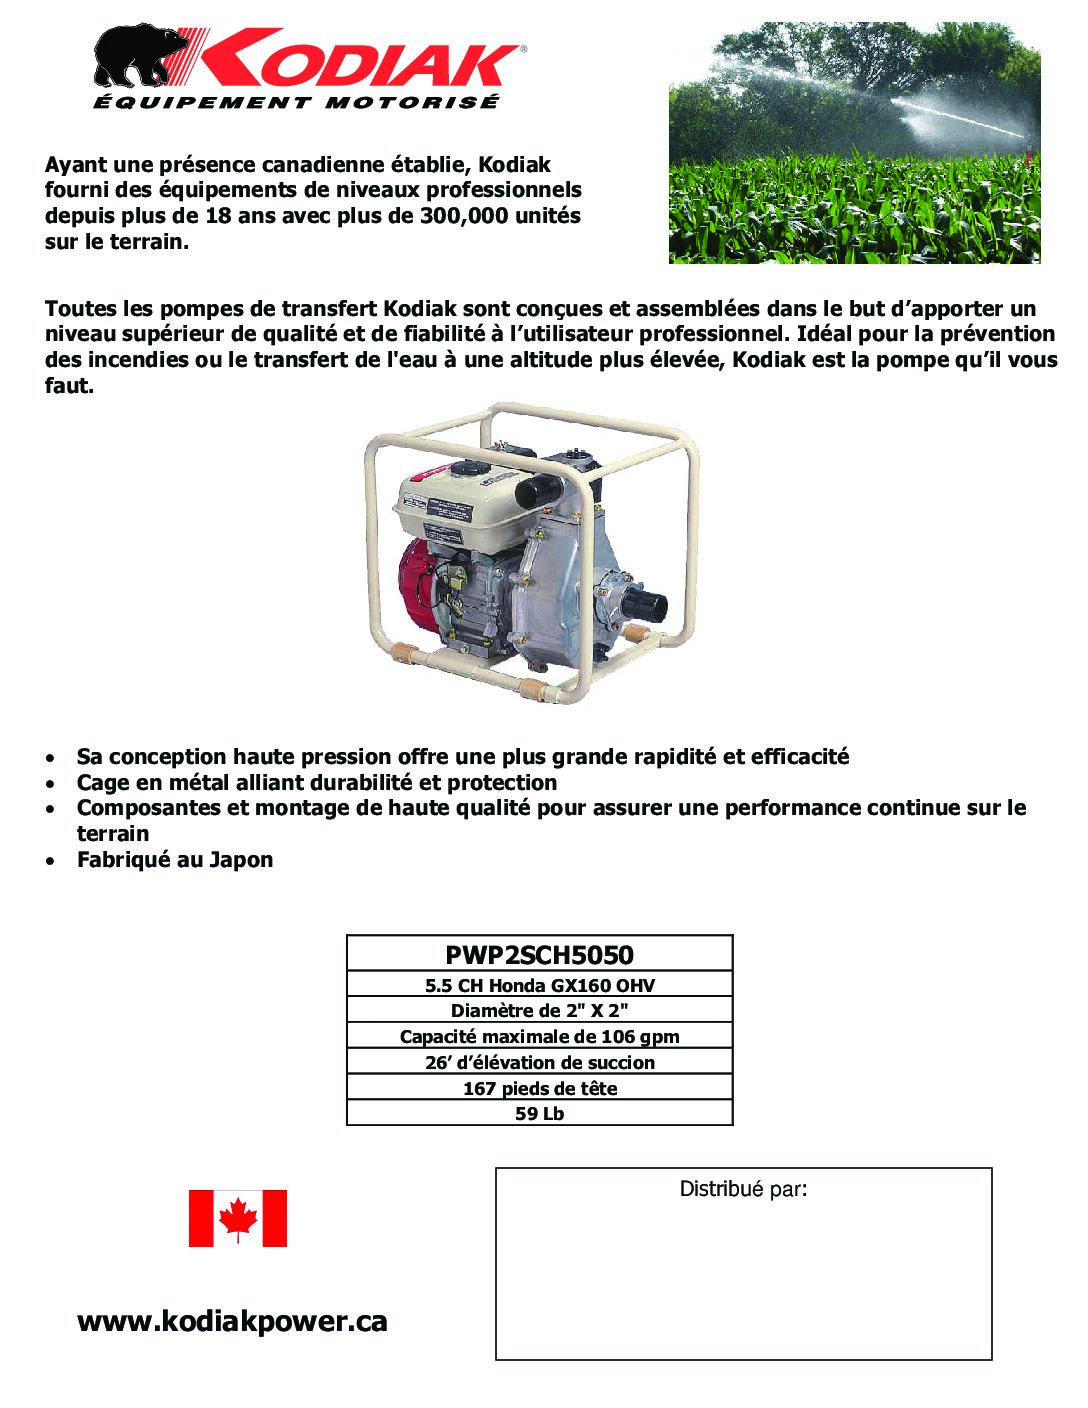 PWP2SCH5050 French Brochure